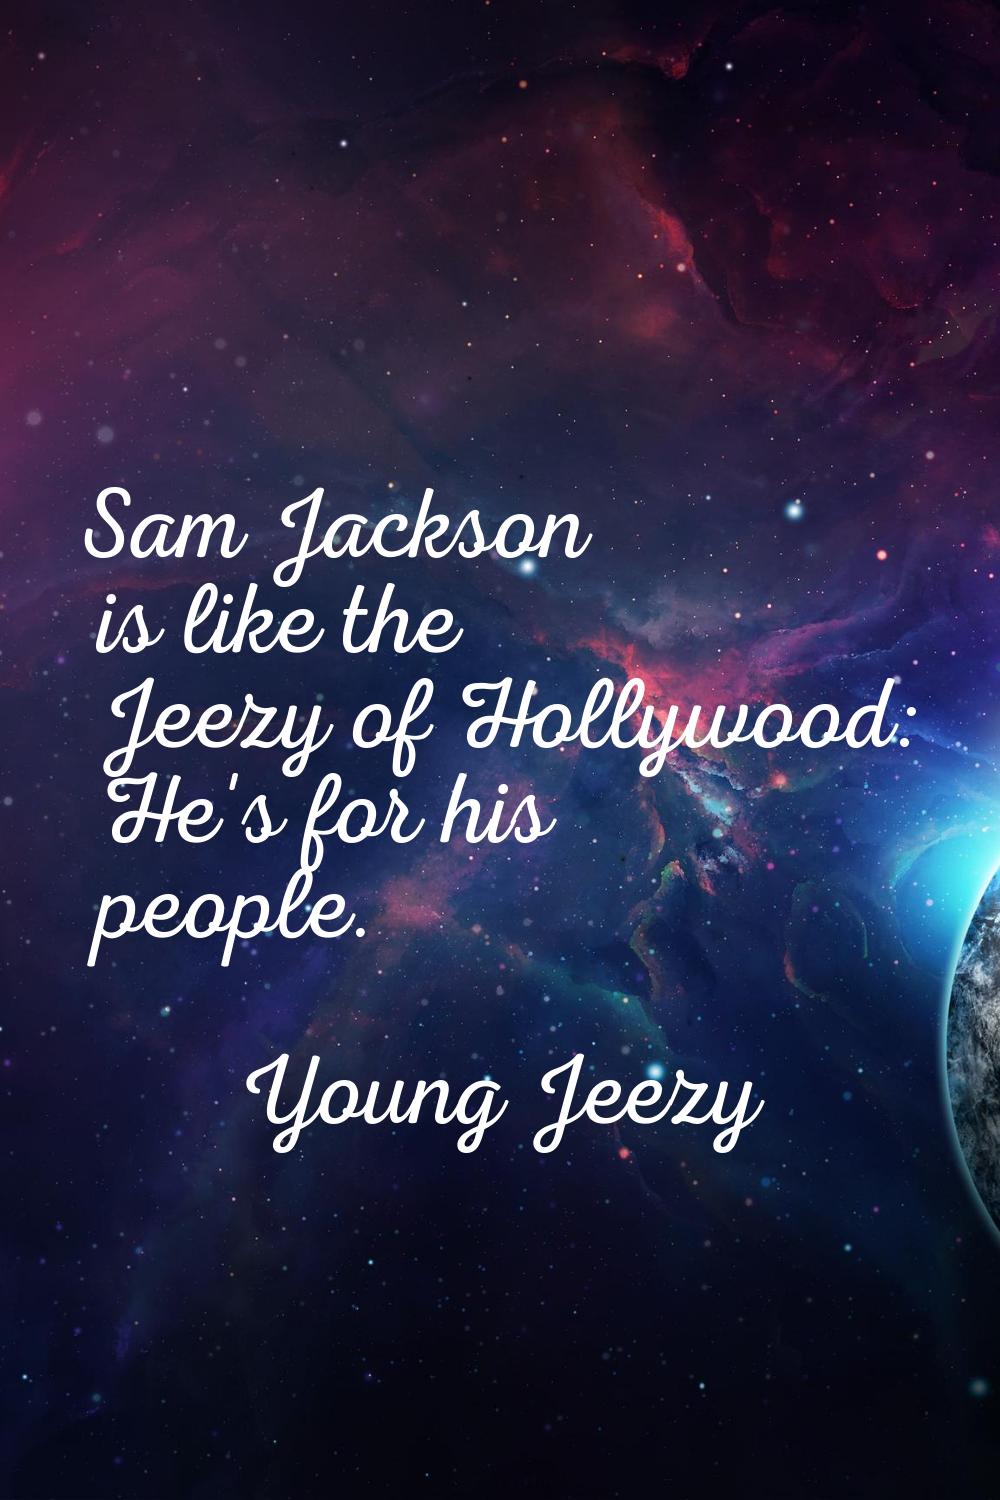 Sam Jackson is like the Jeezy of Hollywood: He's for his people.